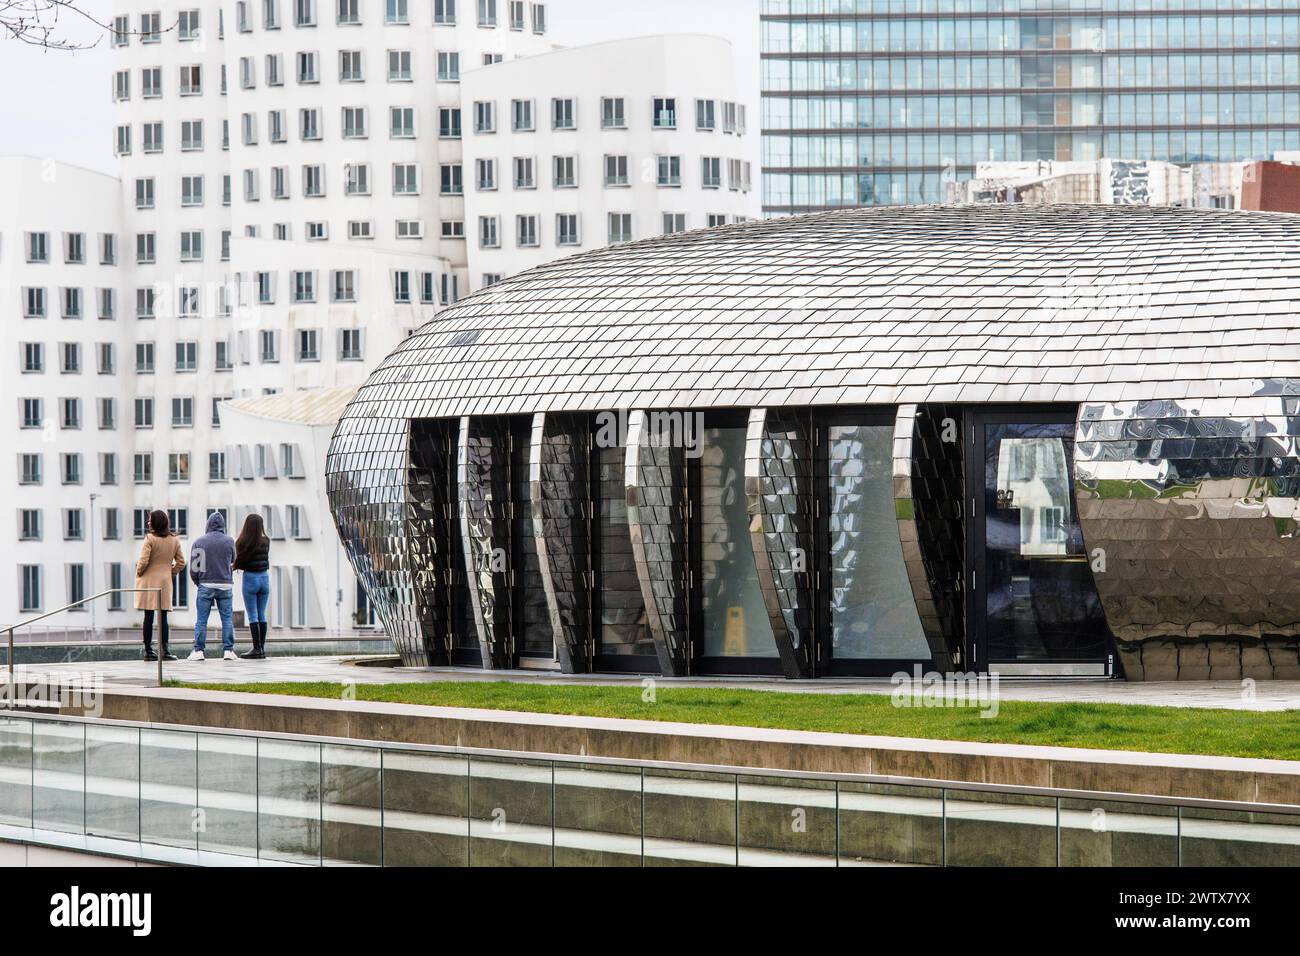 the Pebbles Bar of the Hyatt Regency hotel at the harbor Medienhafen, JSK architects, in the background the buildings Neuer Zollhof by Frank O. Gehry Stock Photo